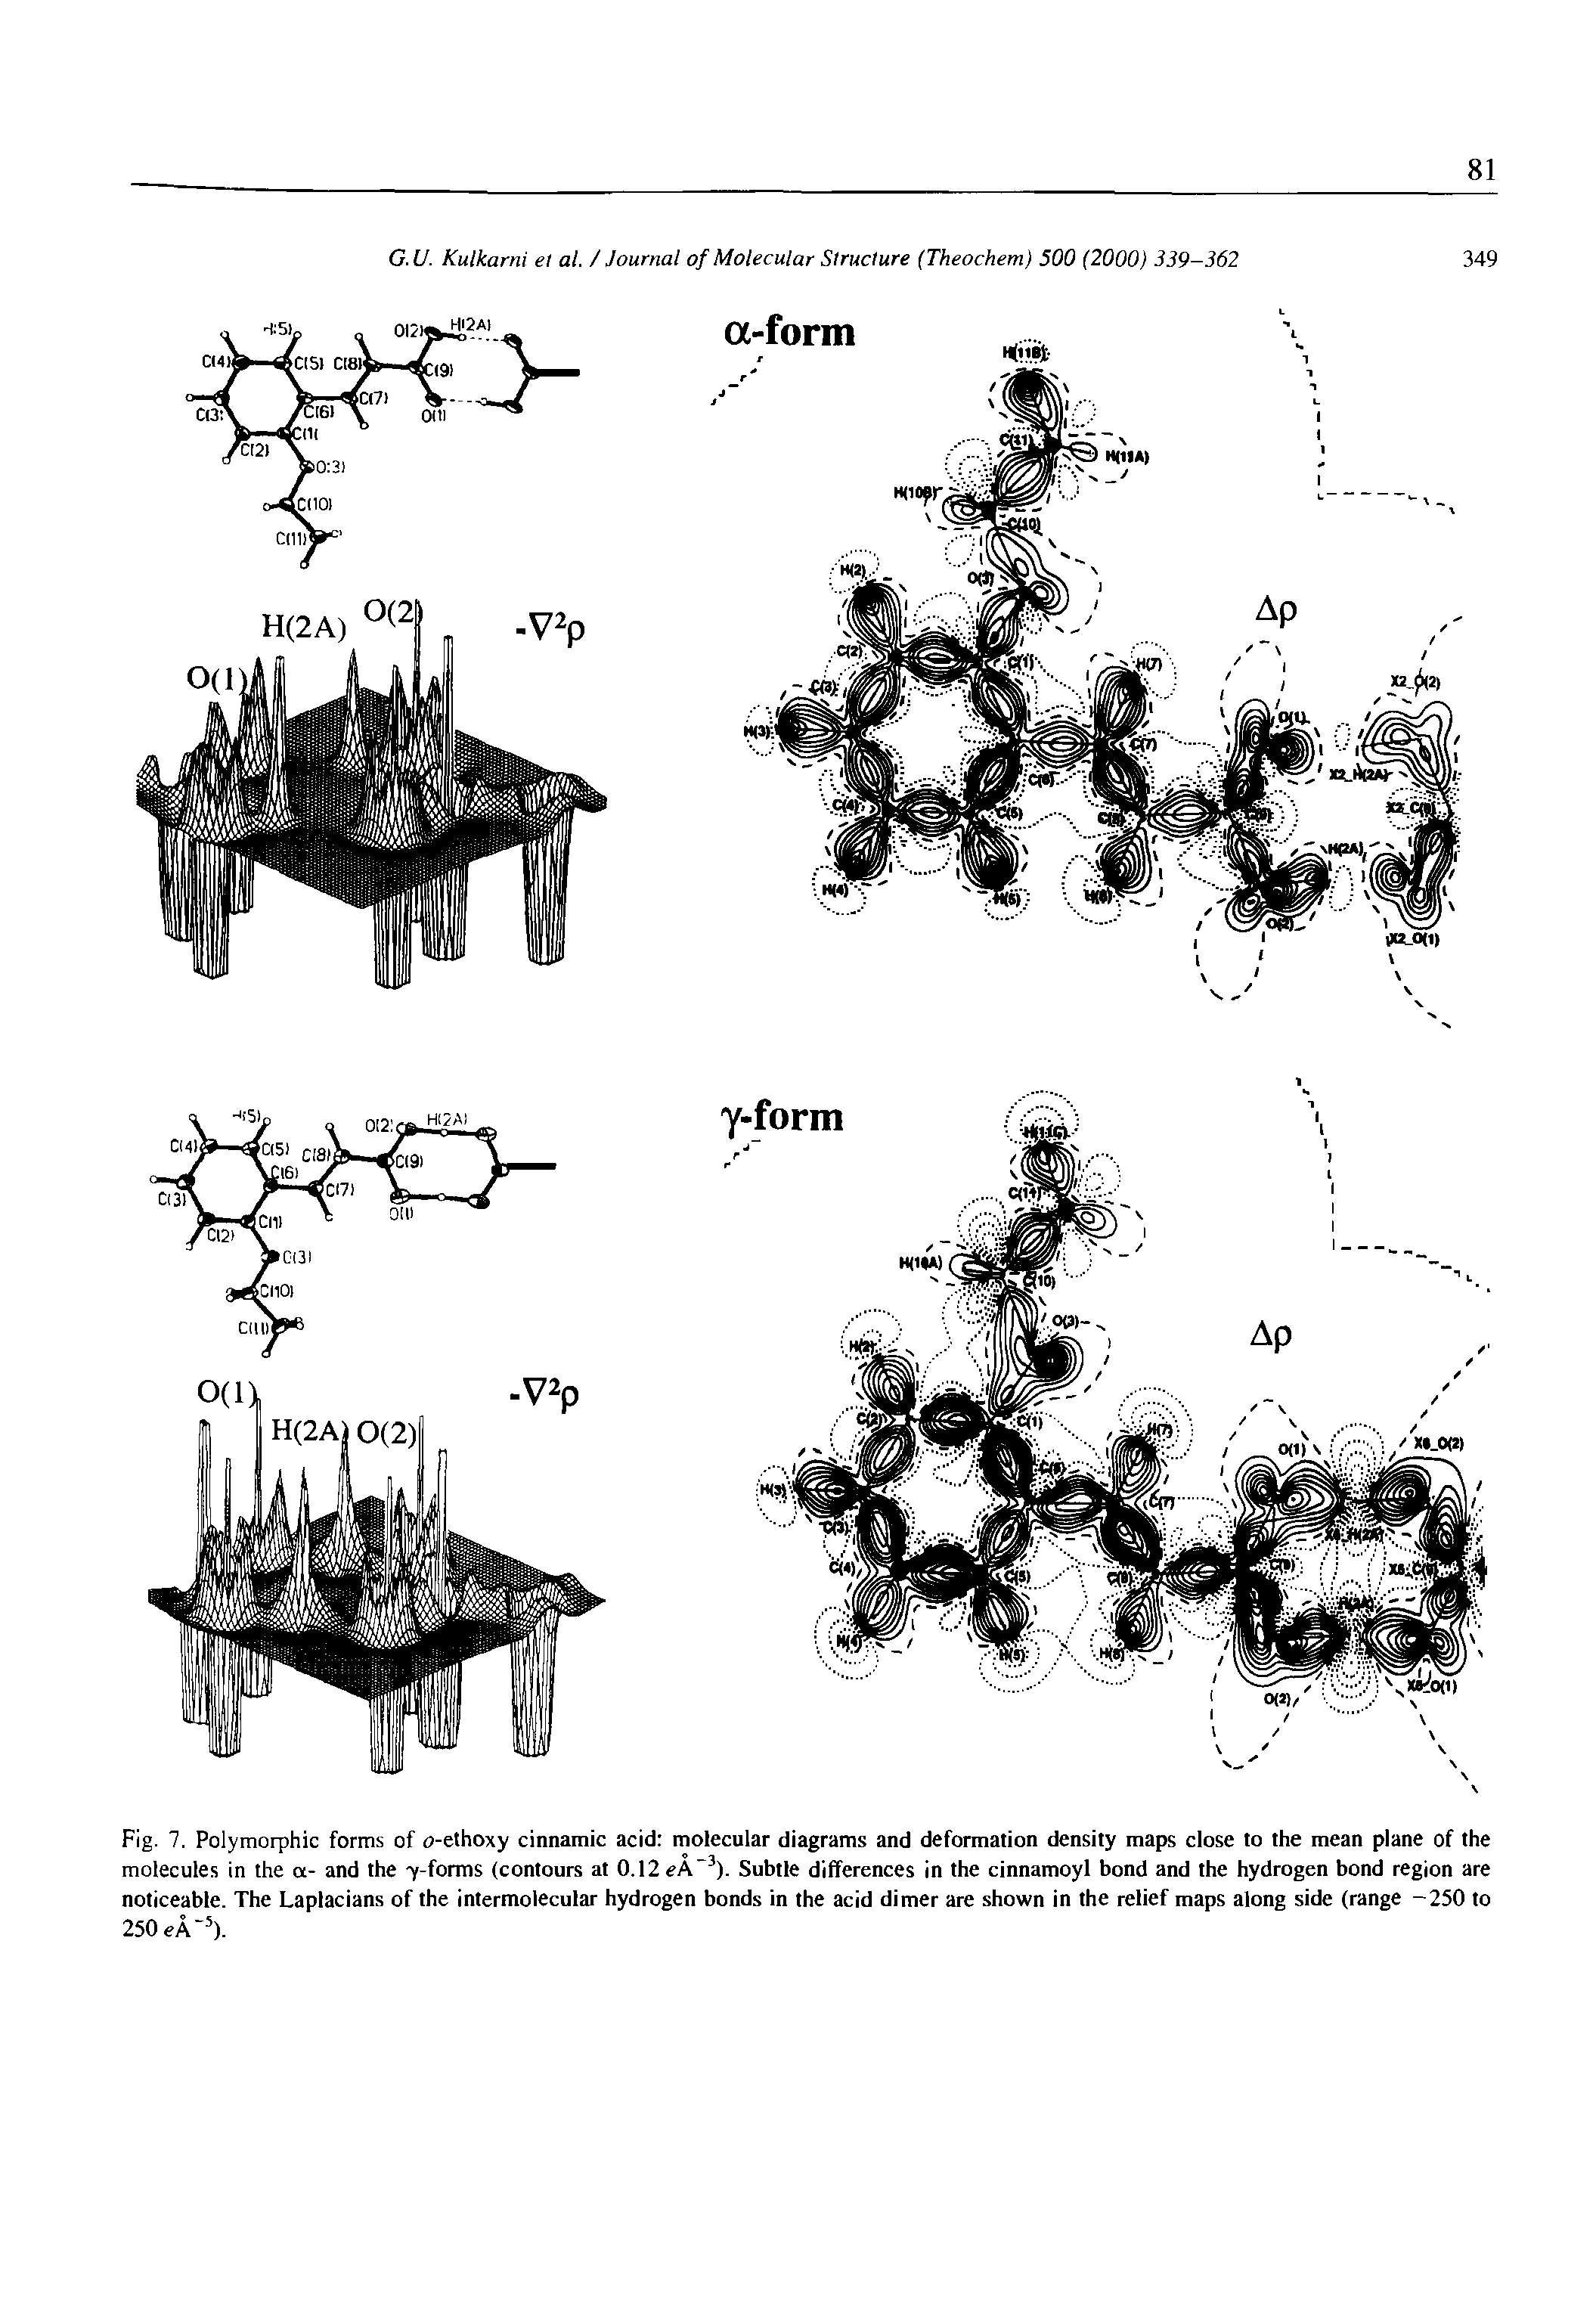 Fig. 7. Polymorphic forms of o-ethoxy cinnamic acid molecular diagrams and deformation density maps close to the mean plane of the molecules in the a- and the y terms (contours at 0.12 eA 3). Subtle differences in the cinnamoyl bond and the hydrogen bond region are noticeable. The Laplacians of the intermolecular hydrogen bonds in the acid dimer are shown in the relief maps along side (range -250 to 250 eA 5).